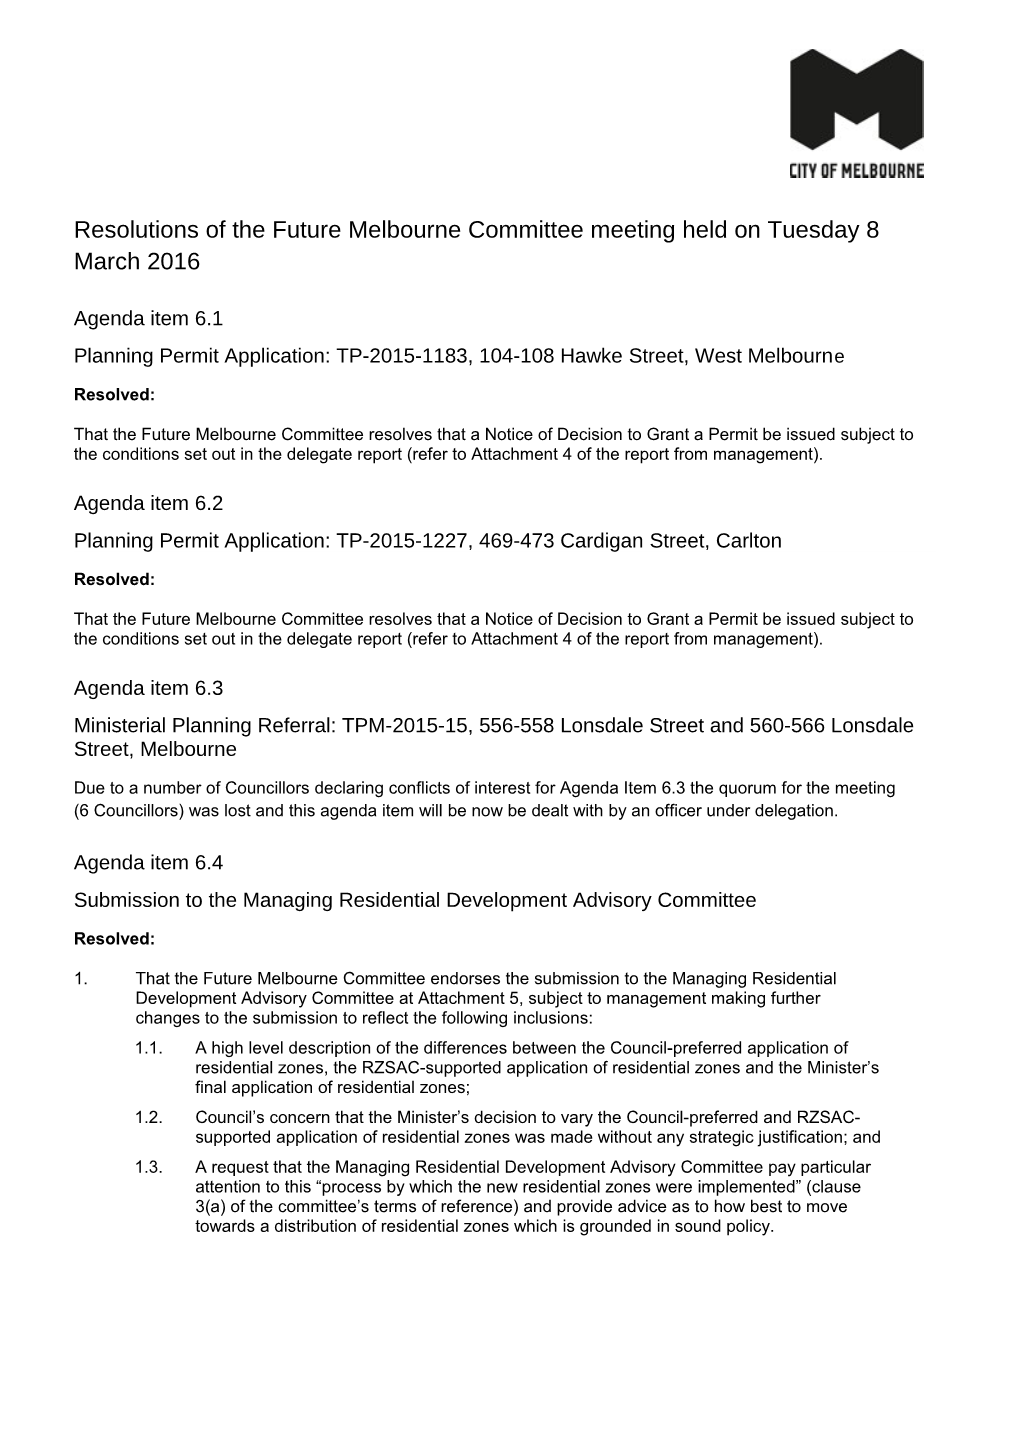 Resolutions of the Future Melbourne Committee Meeting Held on Tuesday 8 March 2016